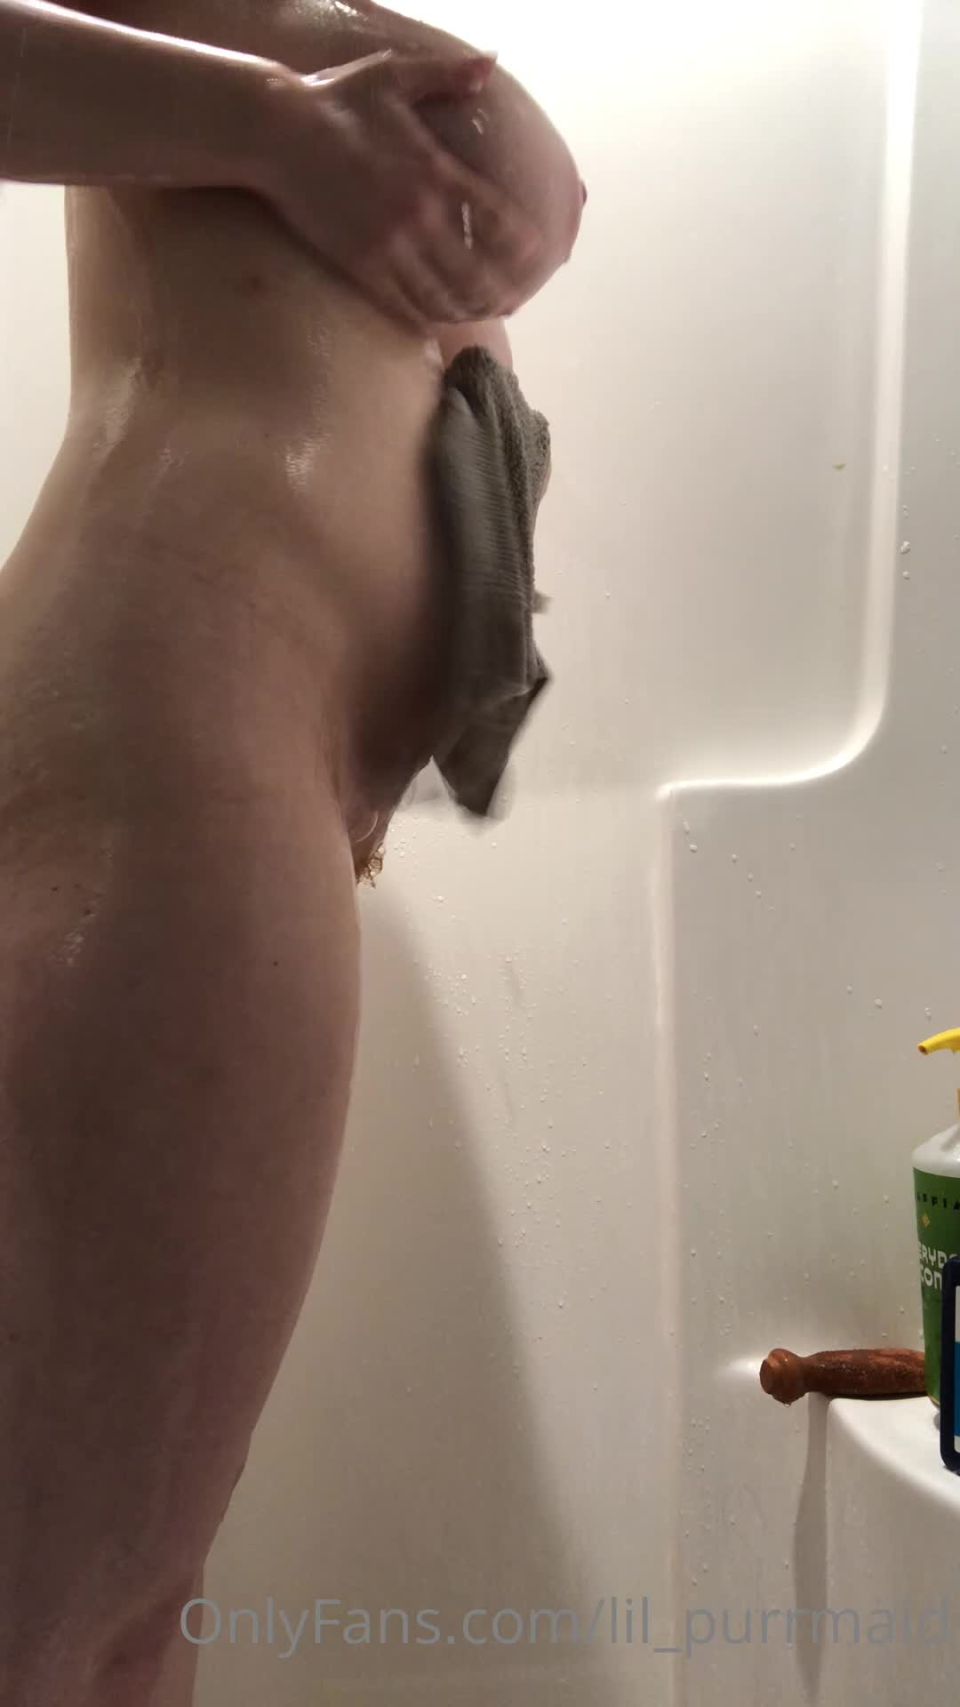 online adult video 18 male fetish Michelle Milkers, Lil Purrmaid - Pregnant Solo Compilation , pregnant on solo female